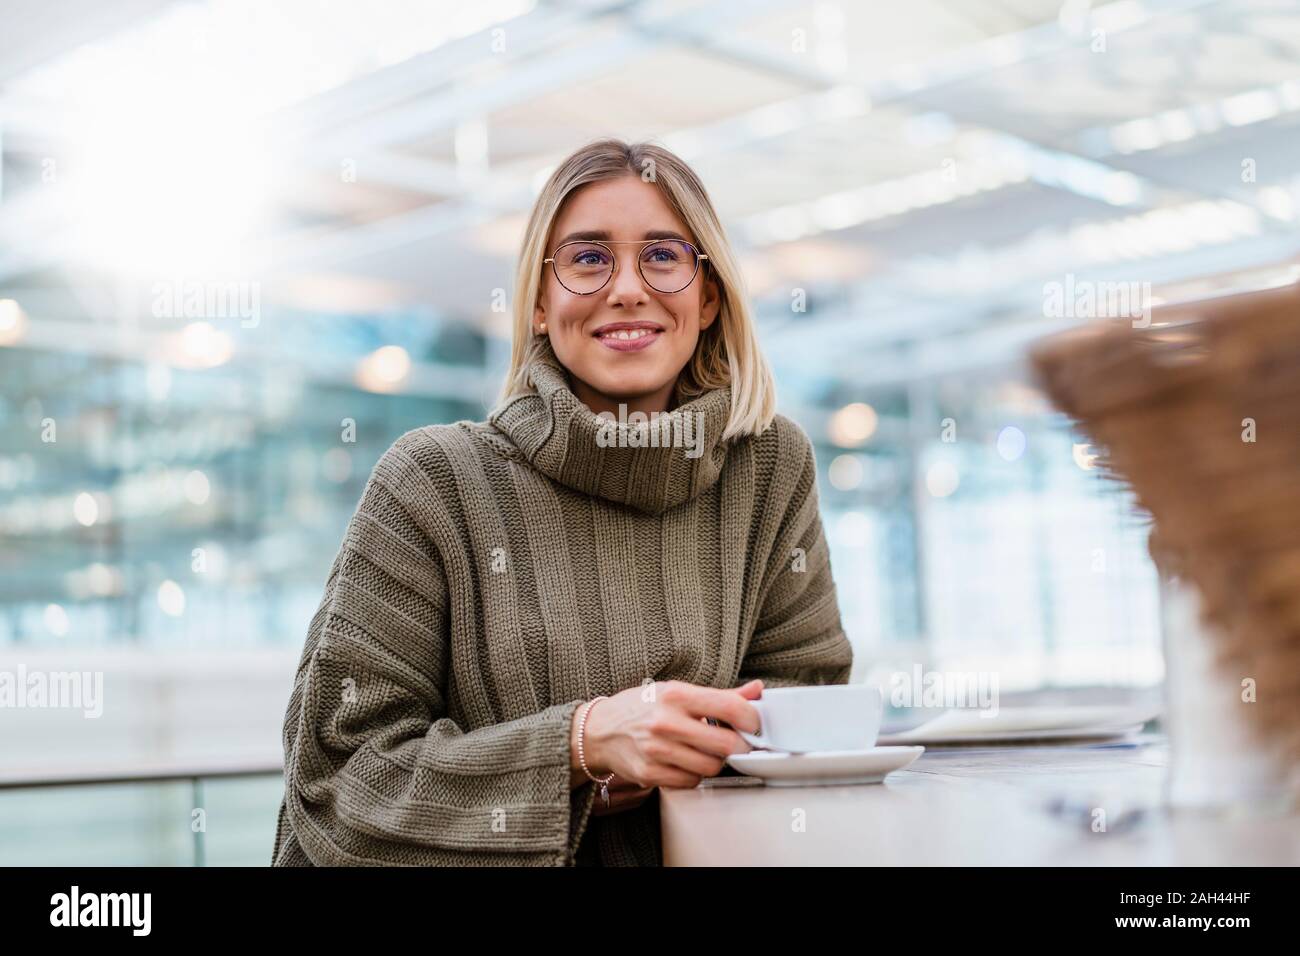 Portrait of a smiling young woman in a cafe Stock Photo